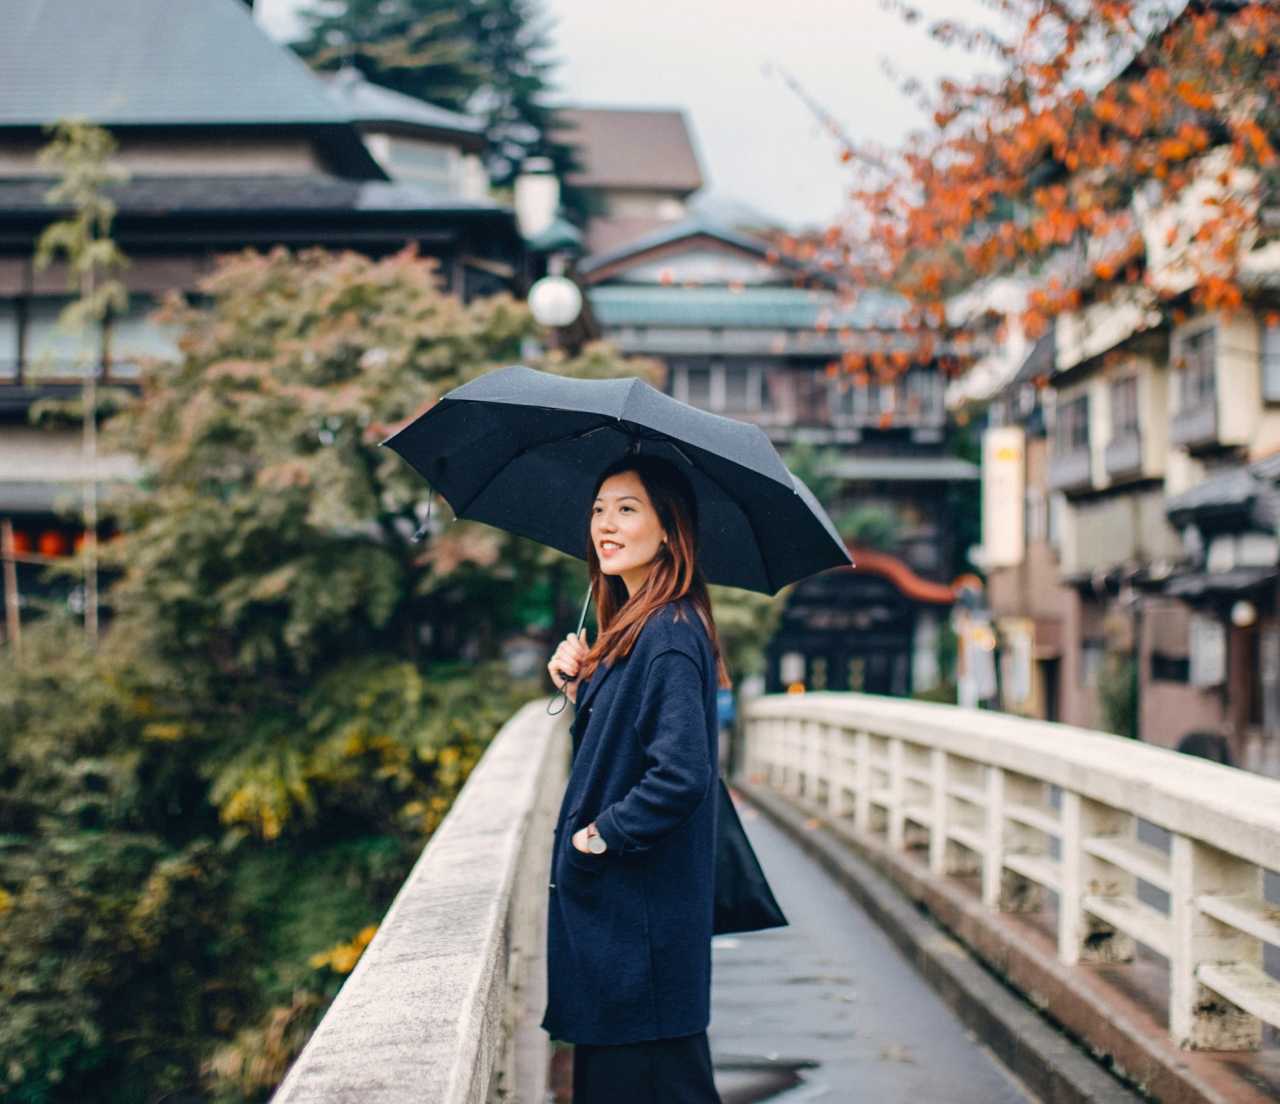 Woman standing on bridge while holding an umbrella